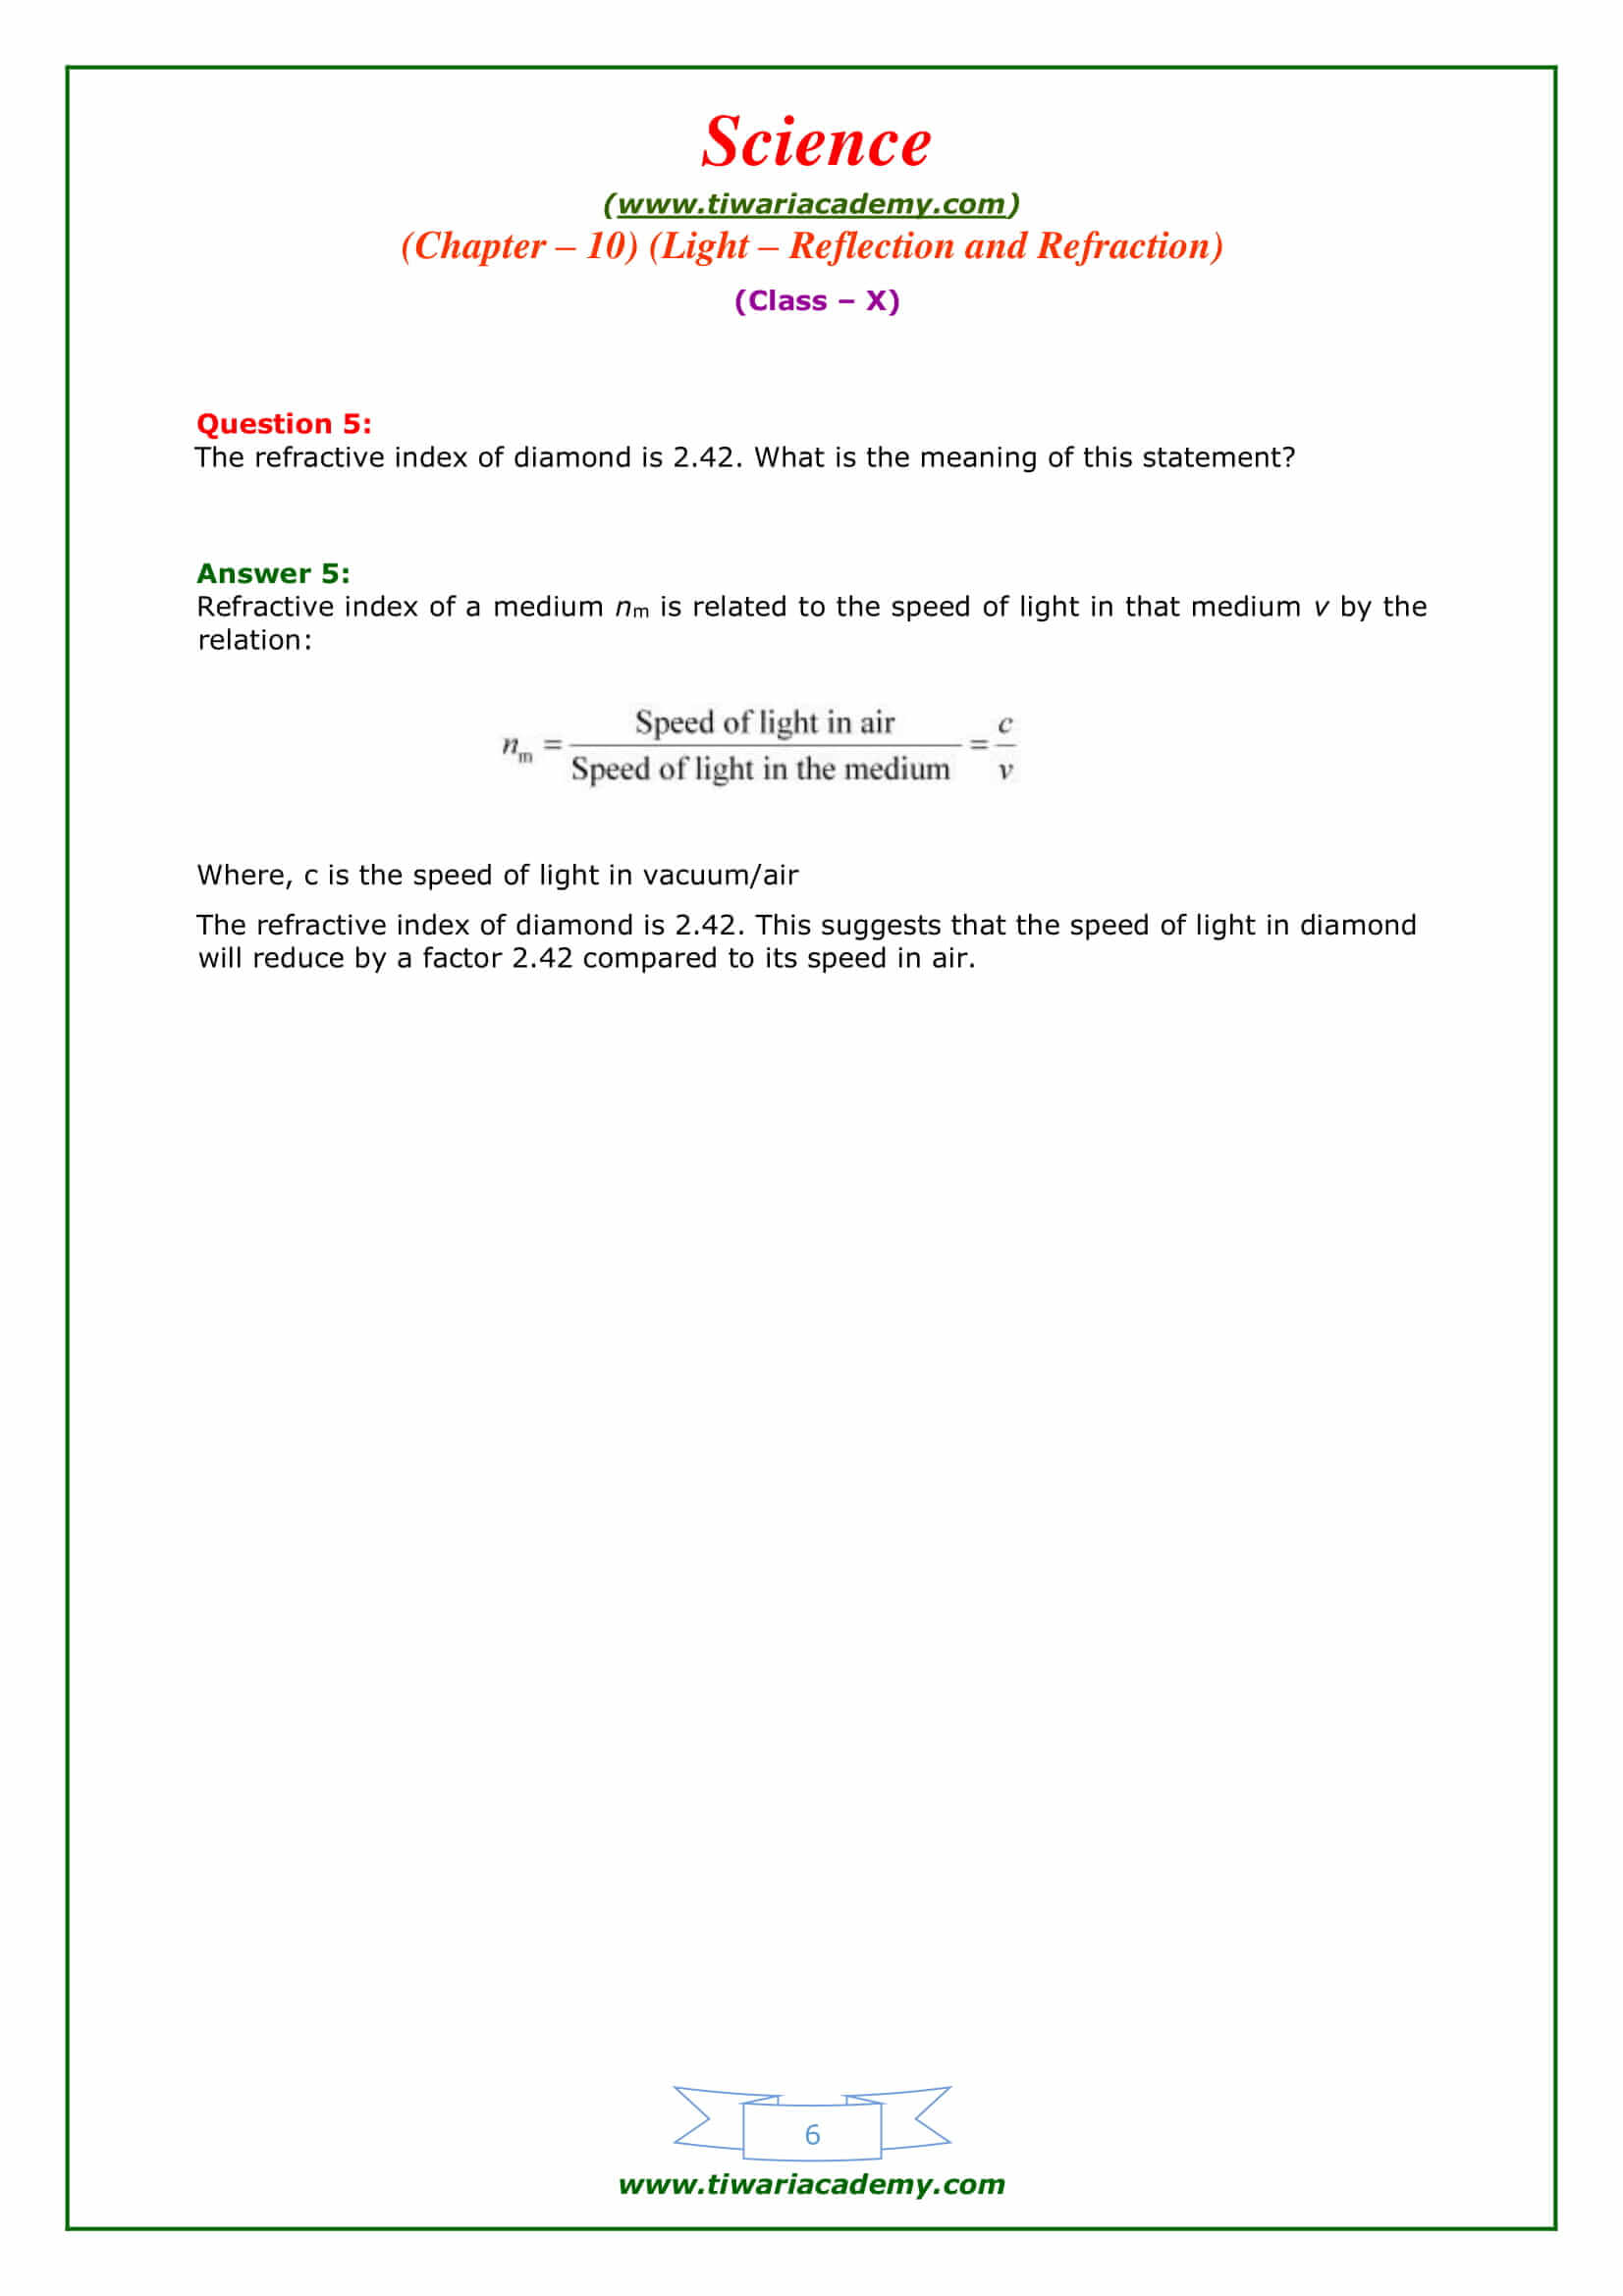 NCERT Solutions for Class 10 Science Chapter 10 page 176 answers in pdf form